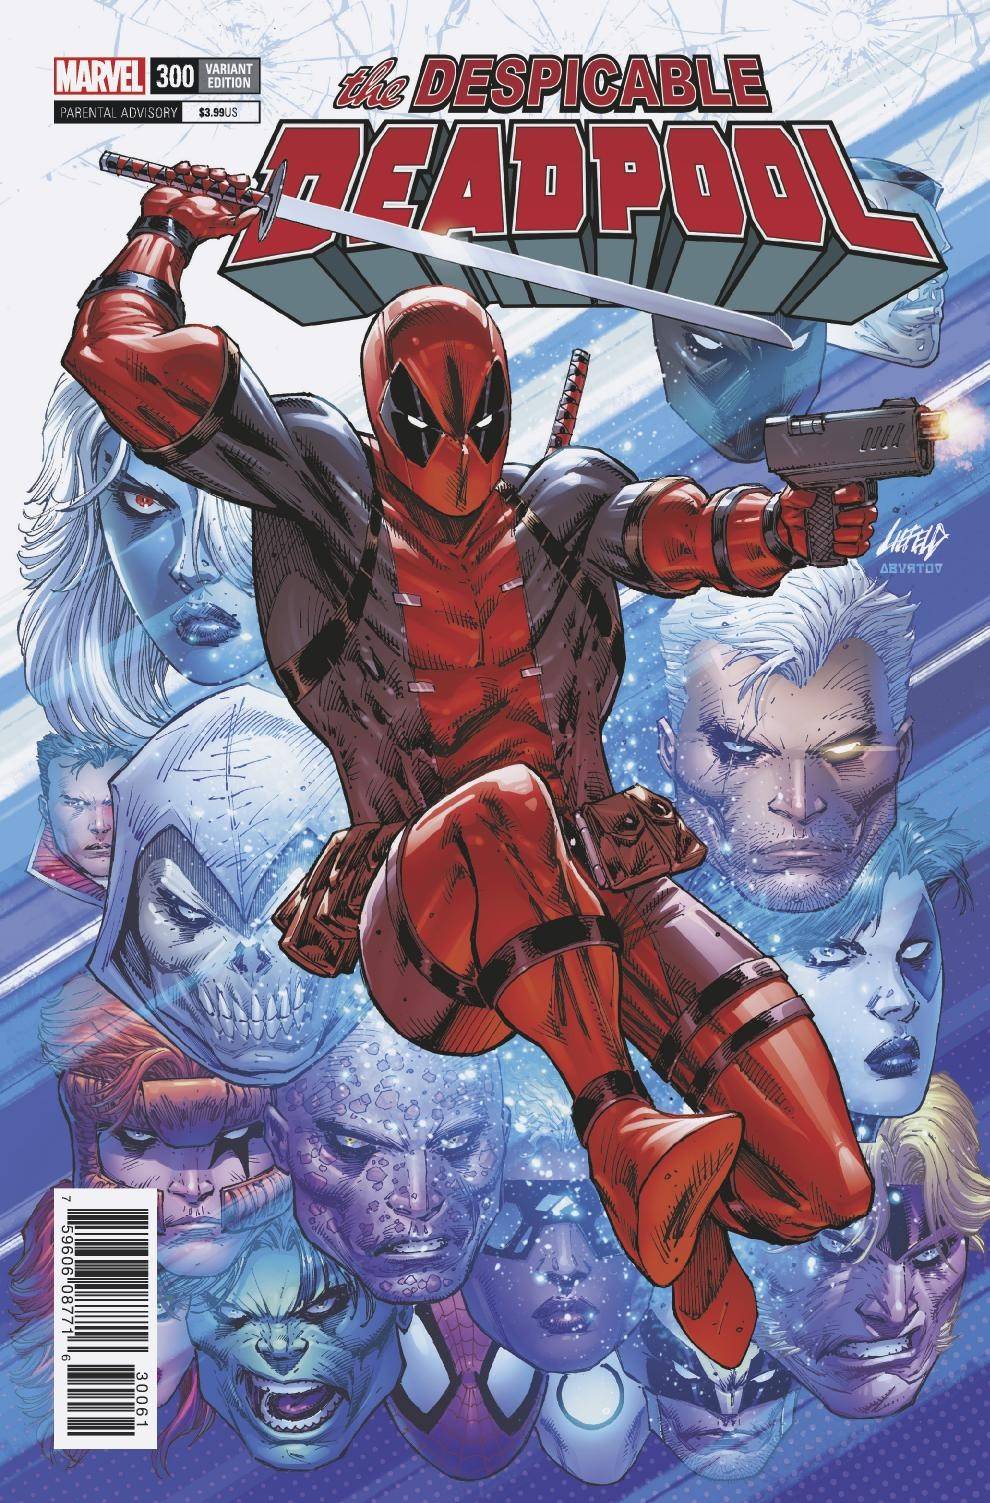 Despicable Deadpool 300 Marvel 1:100 Rob Liefeld Variant (05/09/2018)